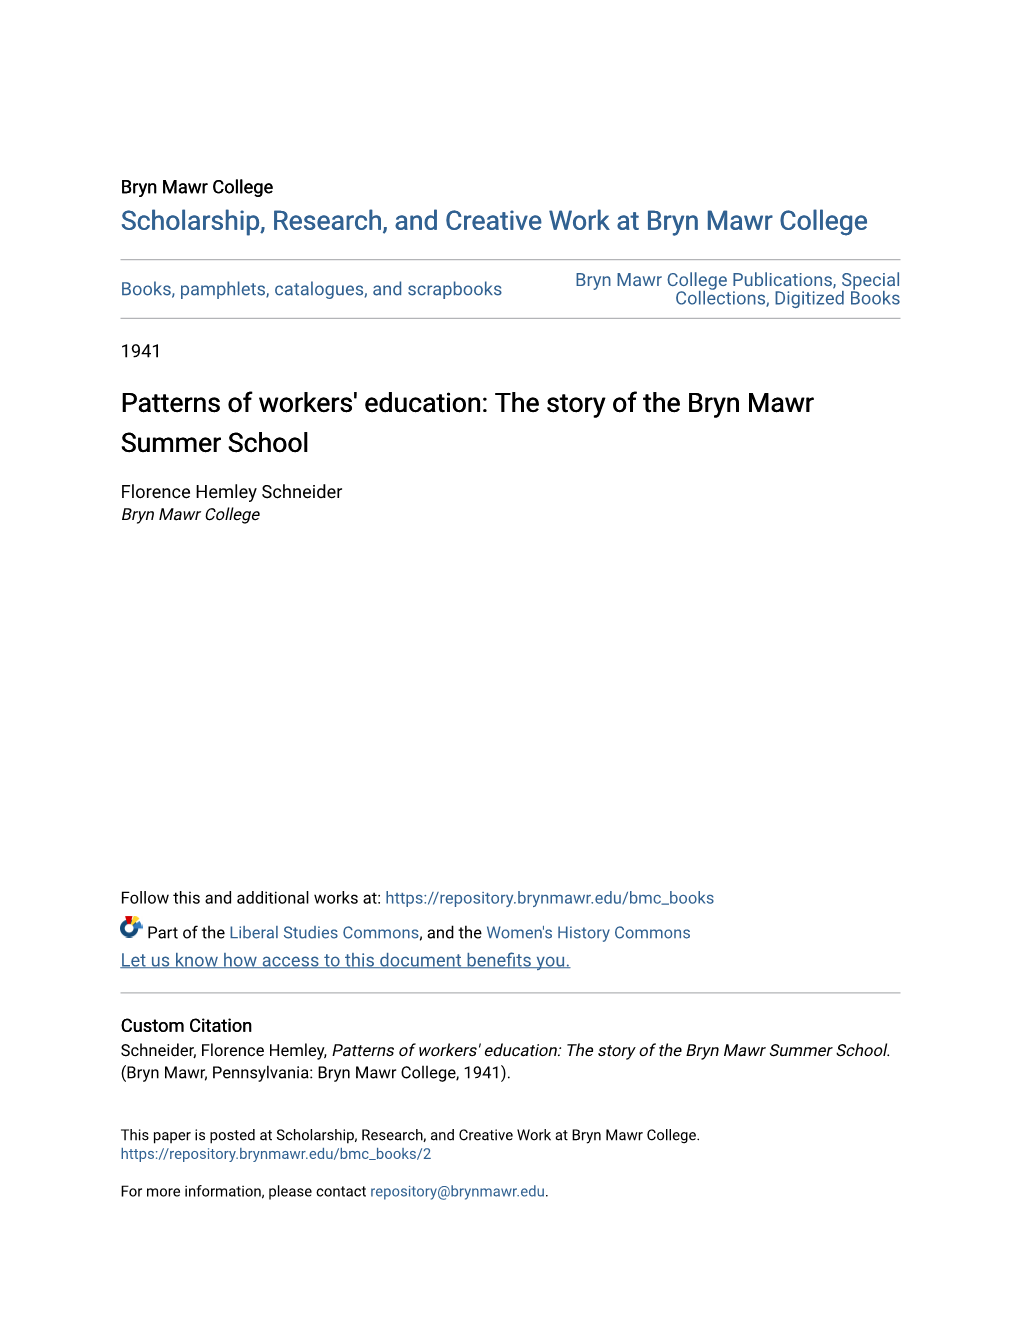 Patterns of Workers' Education: the Story of the Bryn Mawr Summer School